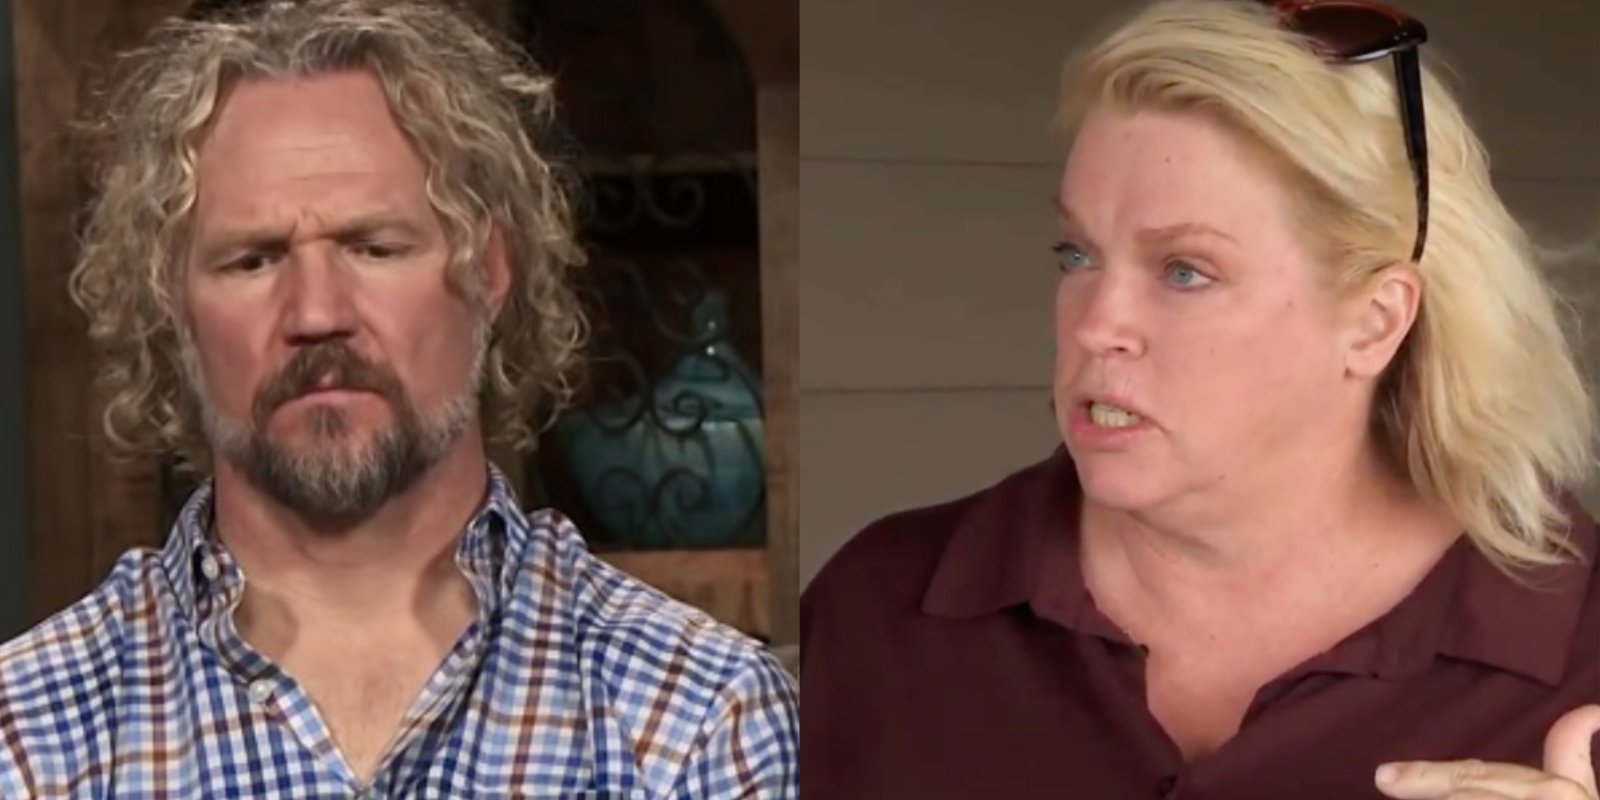 Kody Brown and Janelle Brown in separate photos taken during 'Sister Wives' season 17.